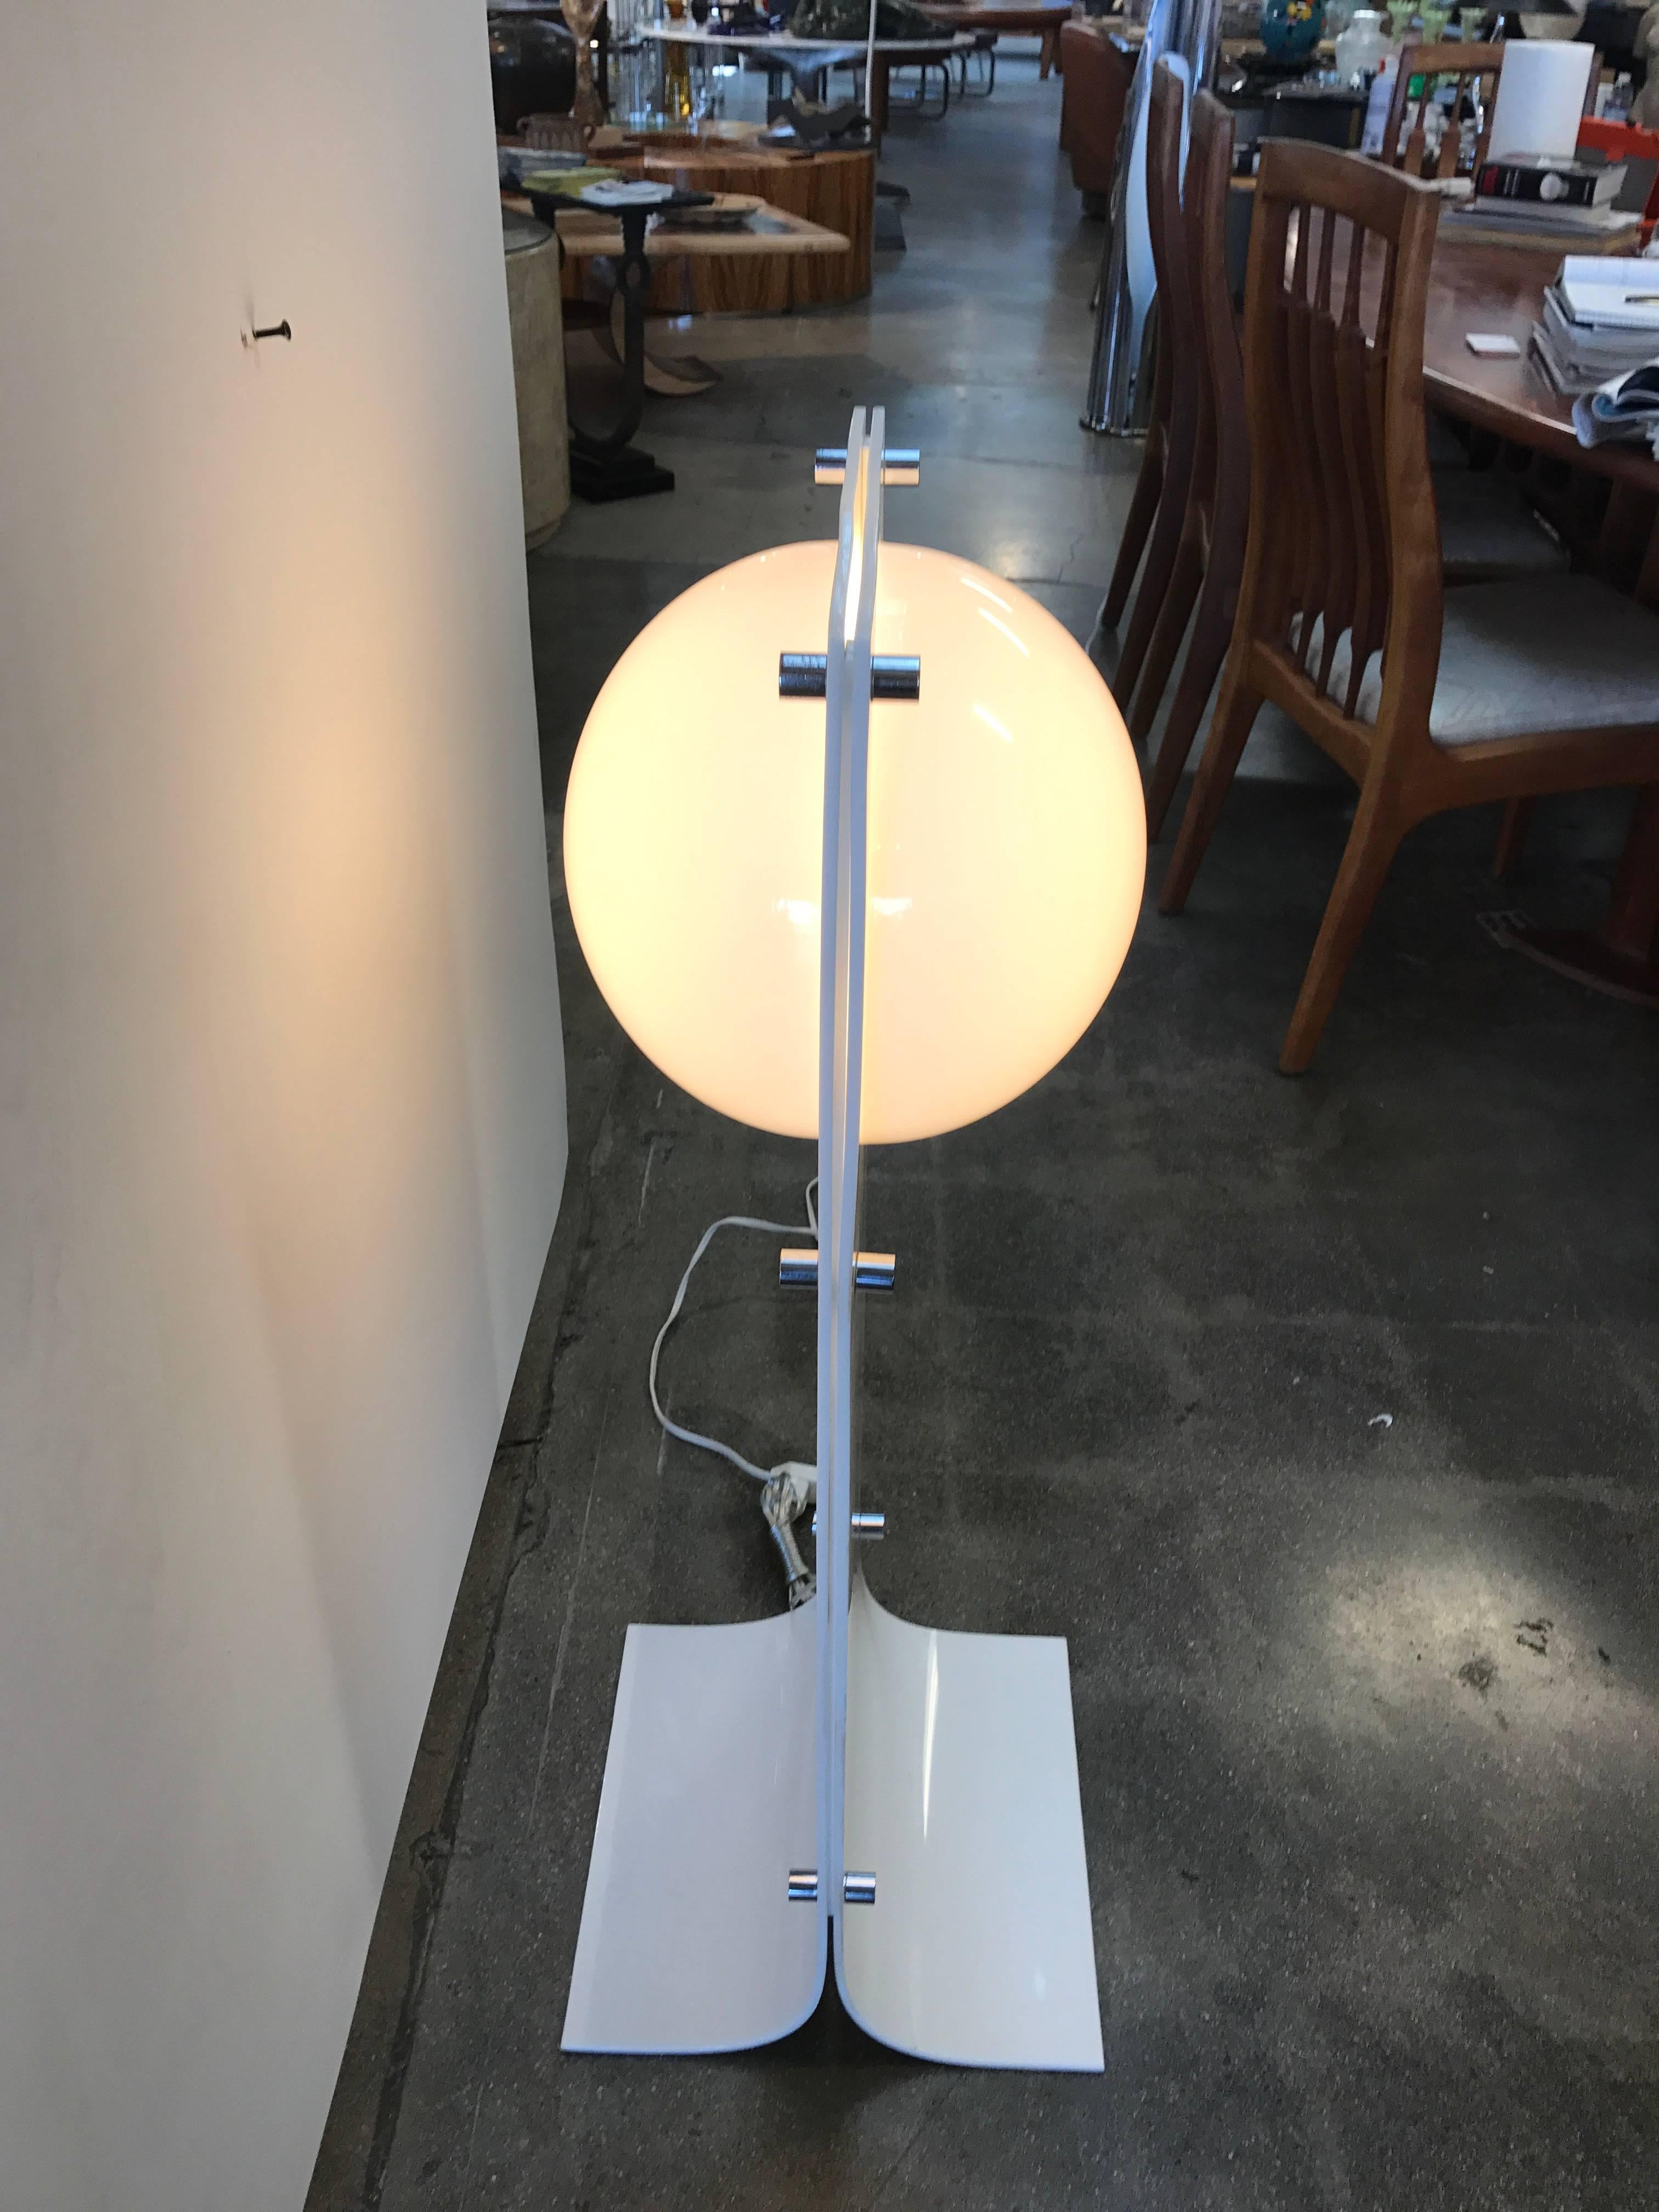 A nice vintage molded acrylic lamp designed by Neal Small. It has been cleaned and re-wired. With the chrome pieces cleaned as best as possible. There are some age appropriate wear with minor surface scratches and imperfections to the chrome but it